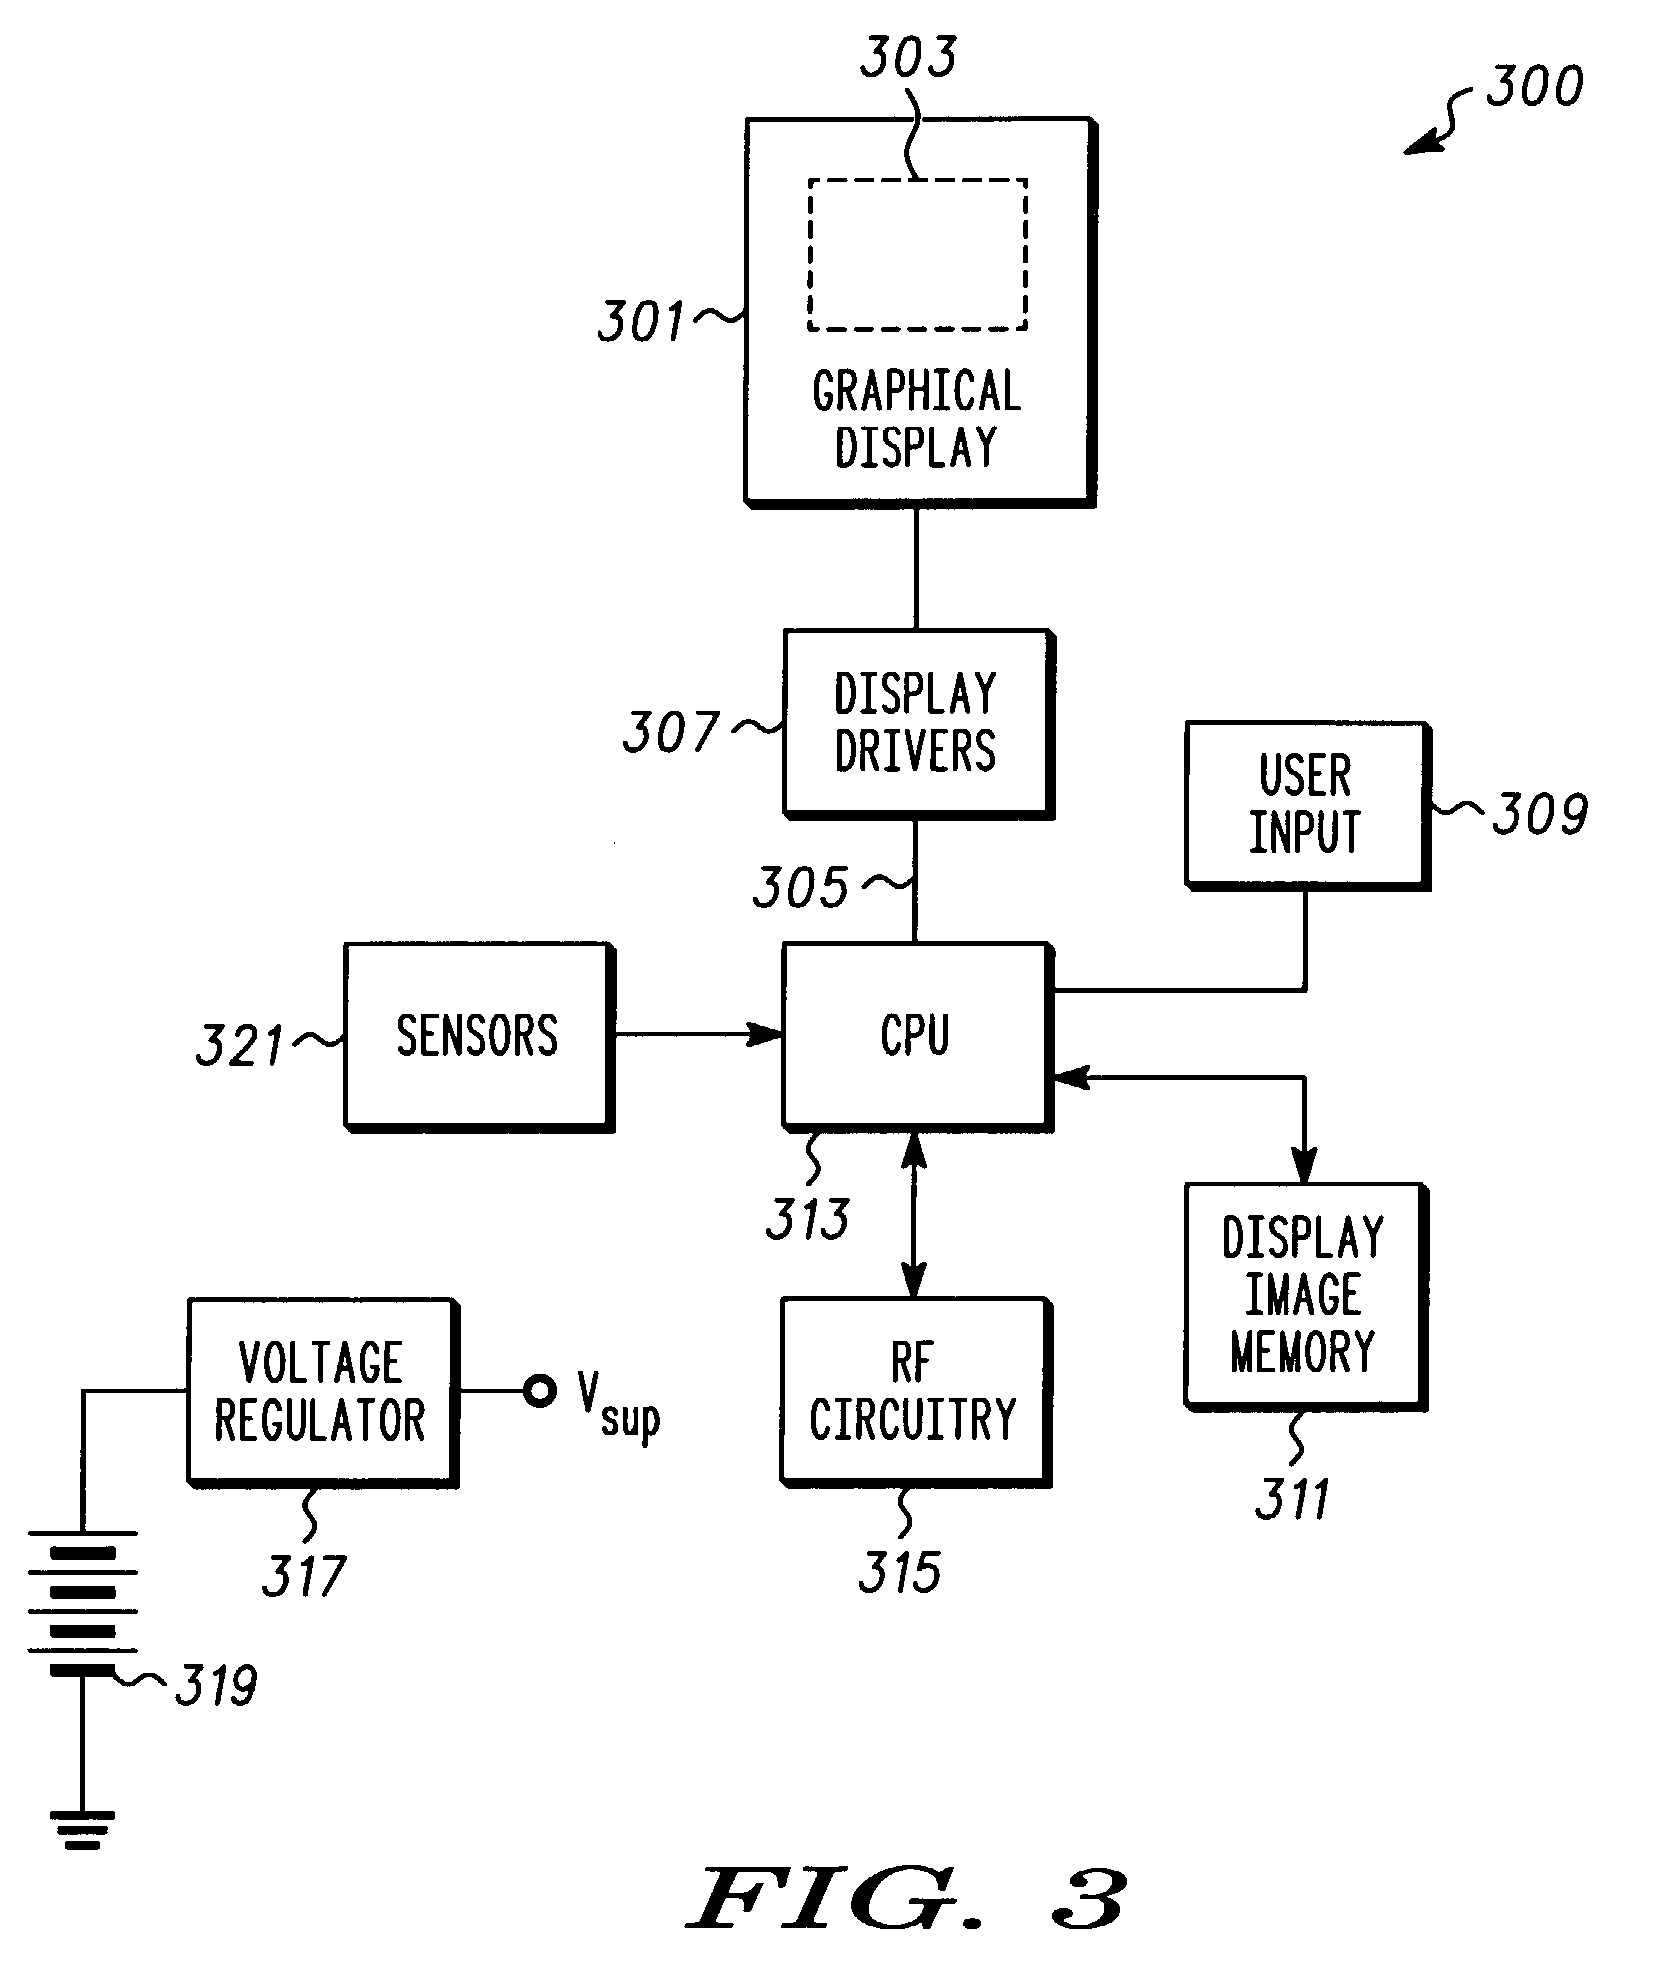 Reduced power consumption for a graphics accelerator and display